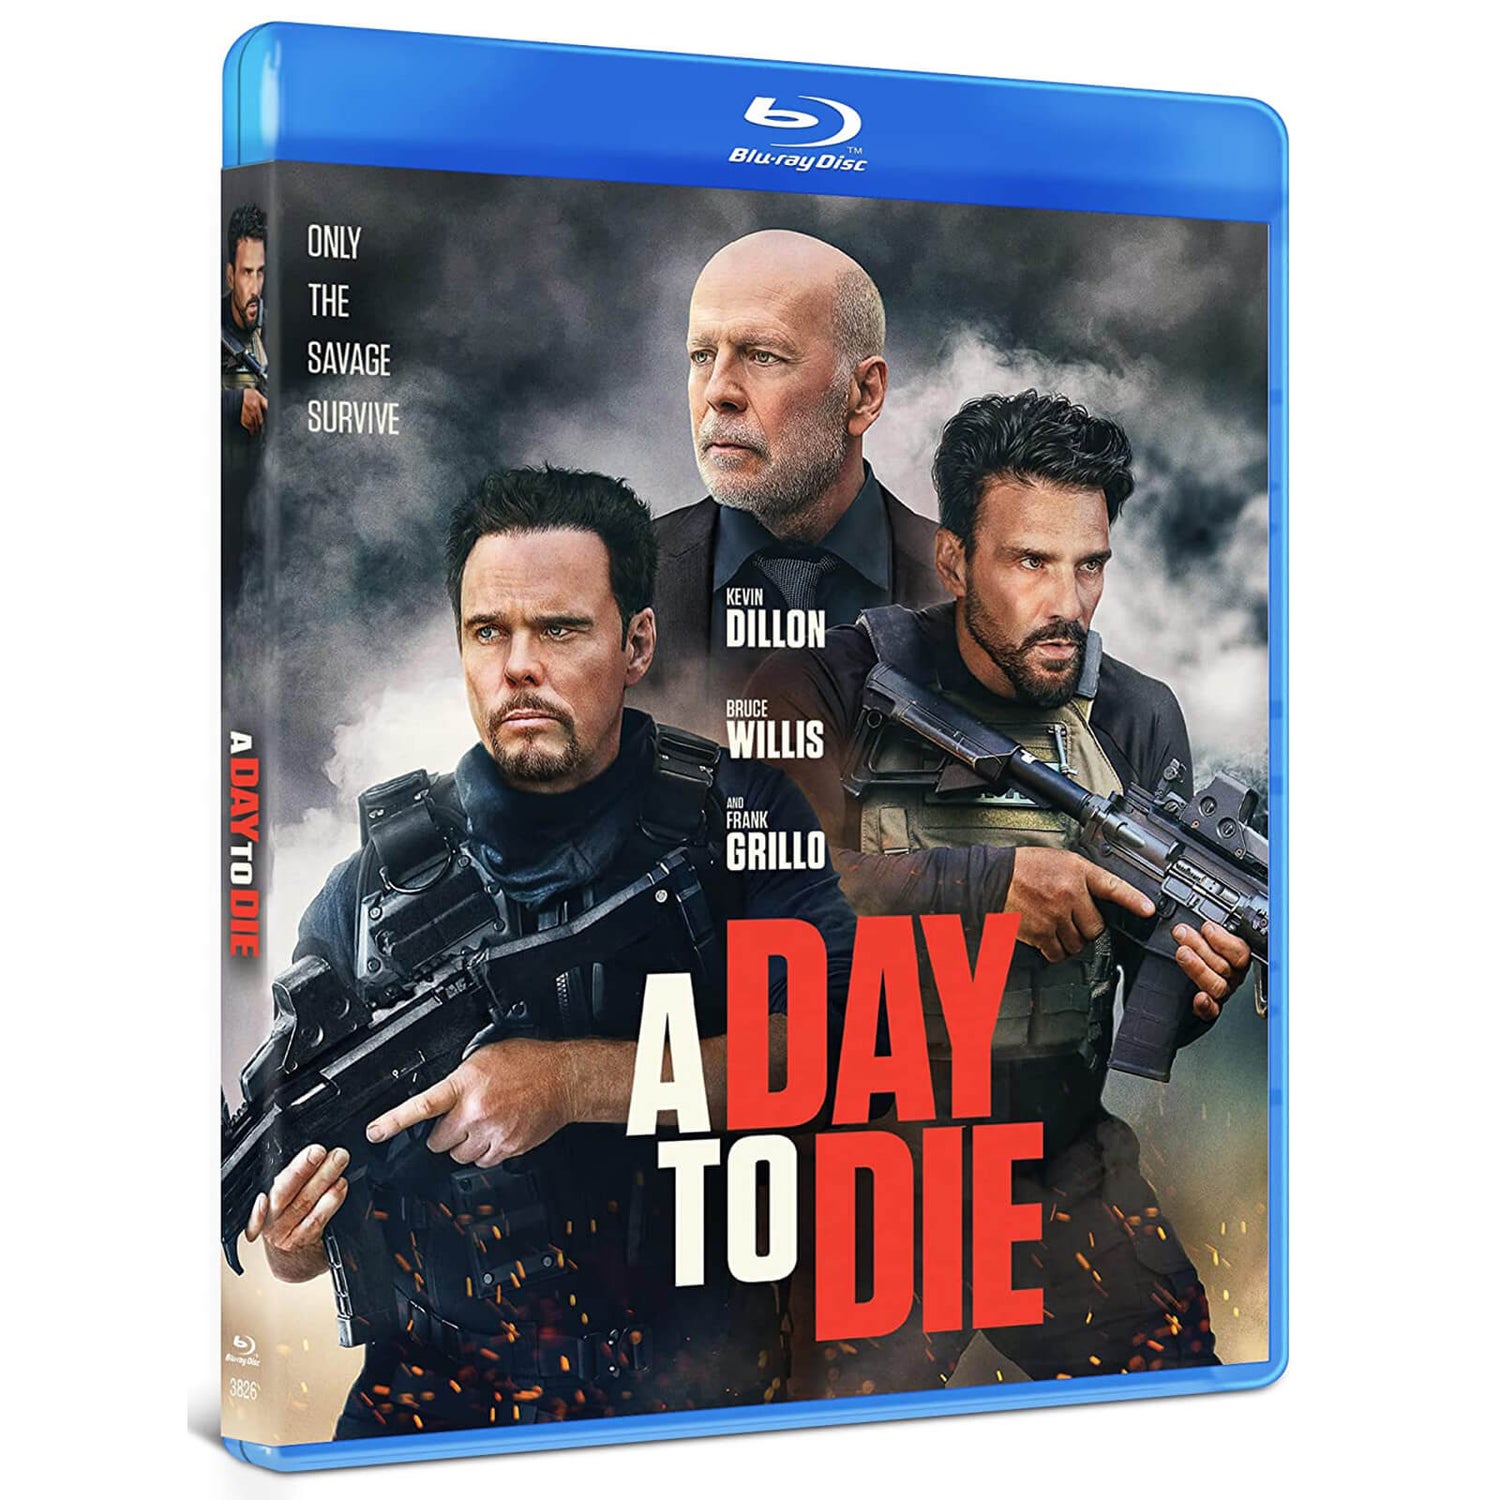 A DAY TO DIE (US Import)